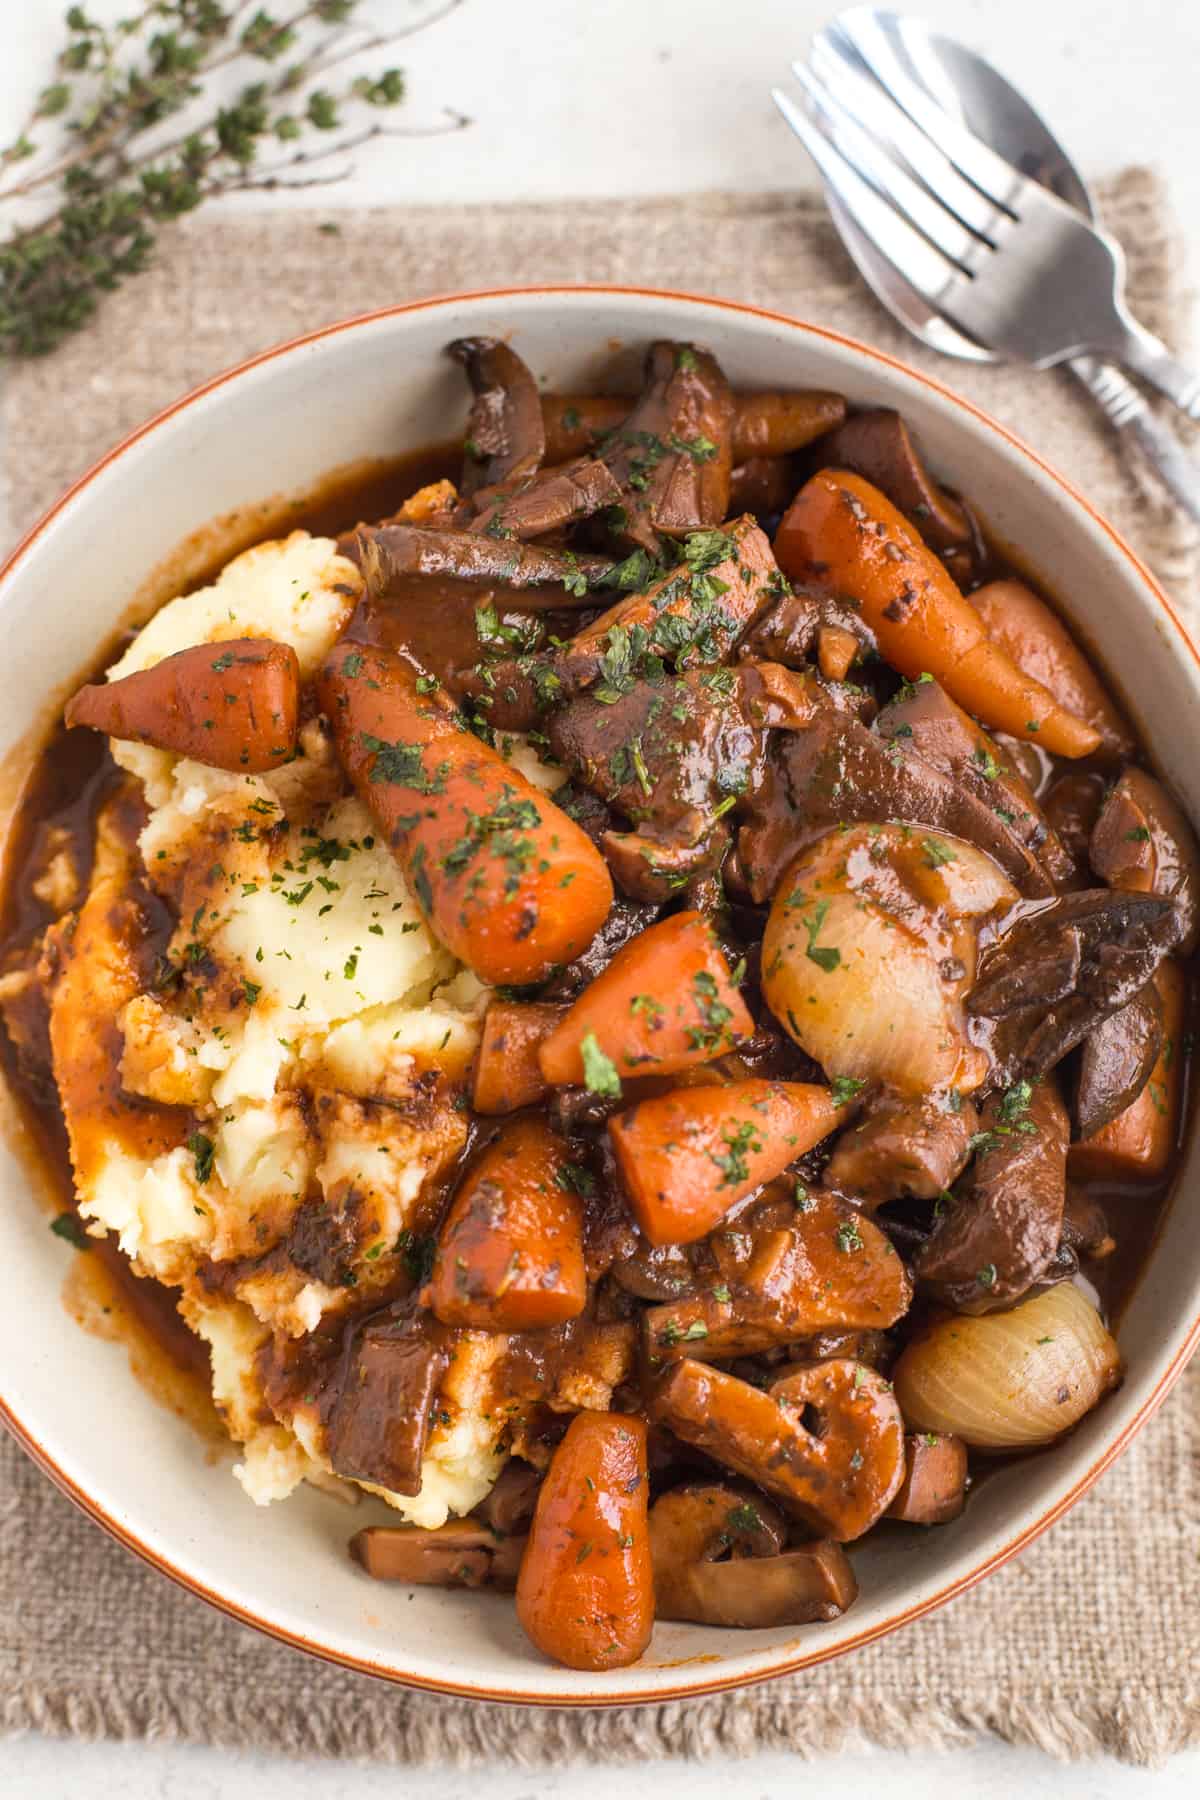 Vegetarian mushroom bourguignon in a bowl with mashed potato.